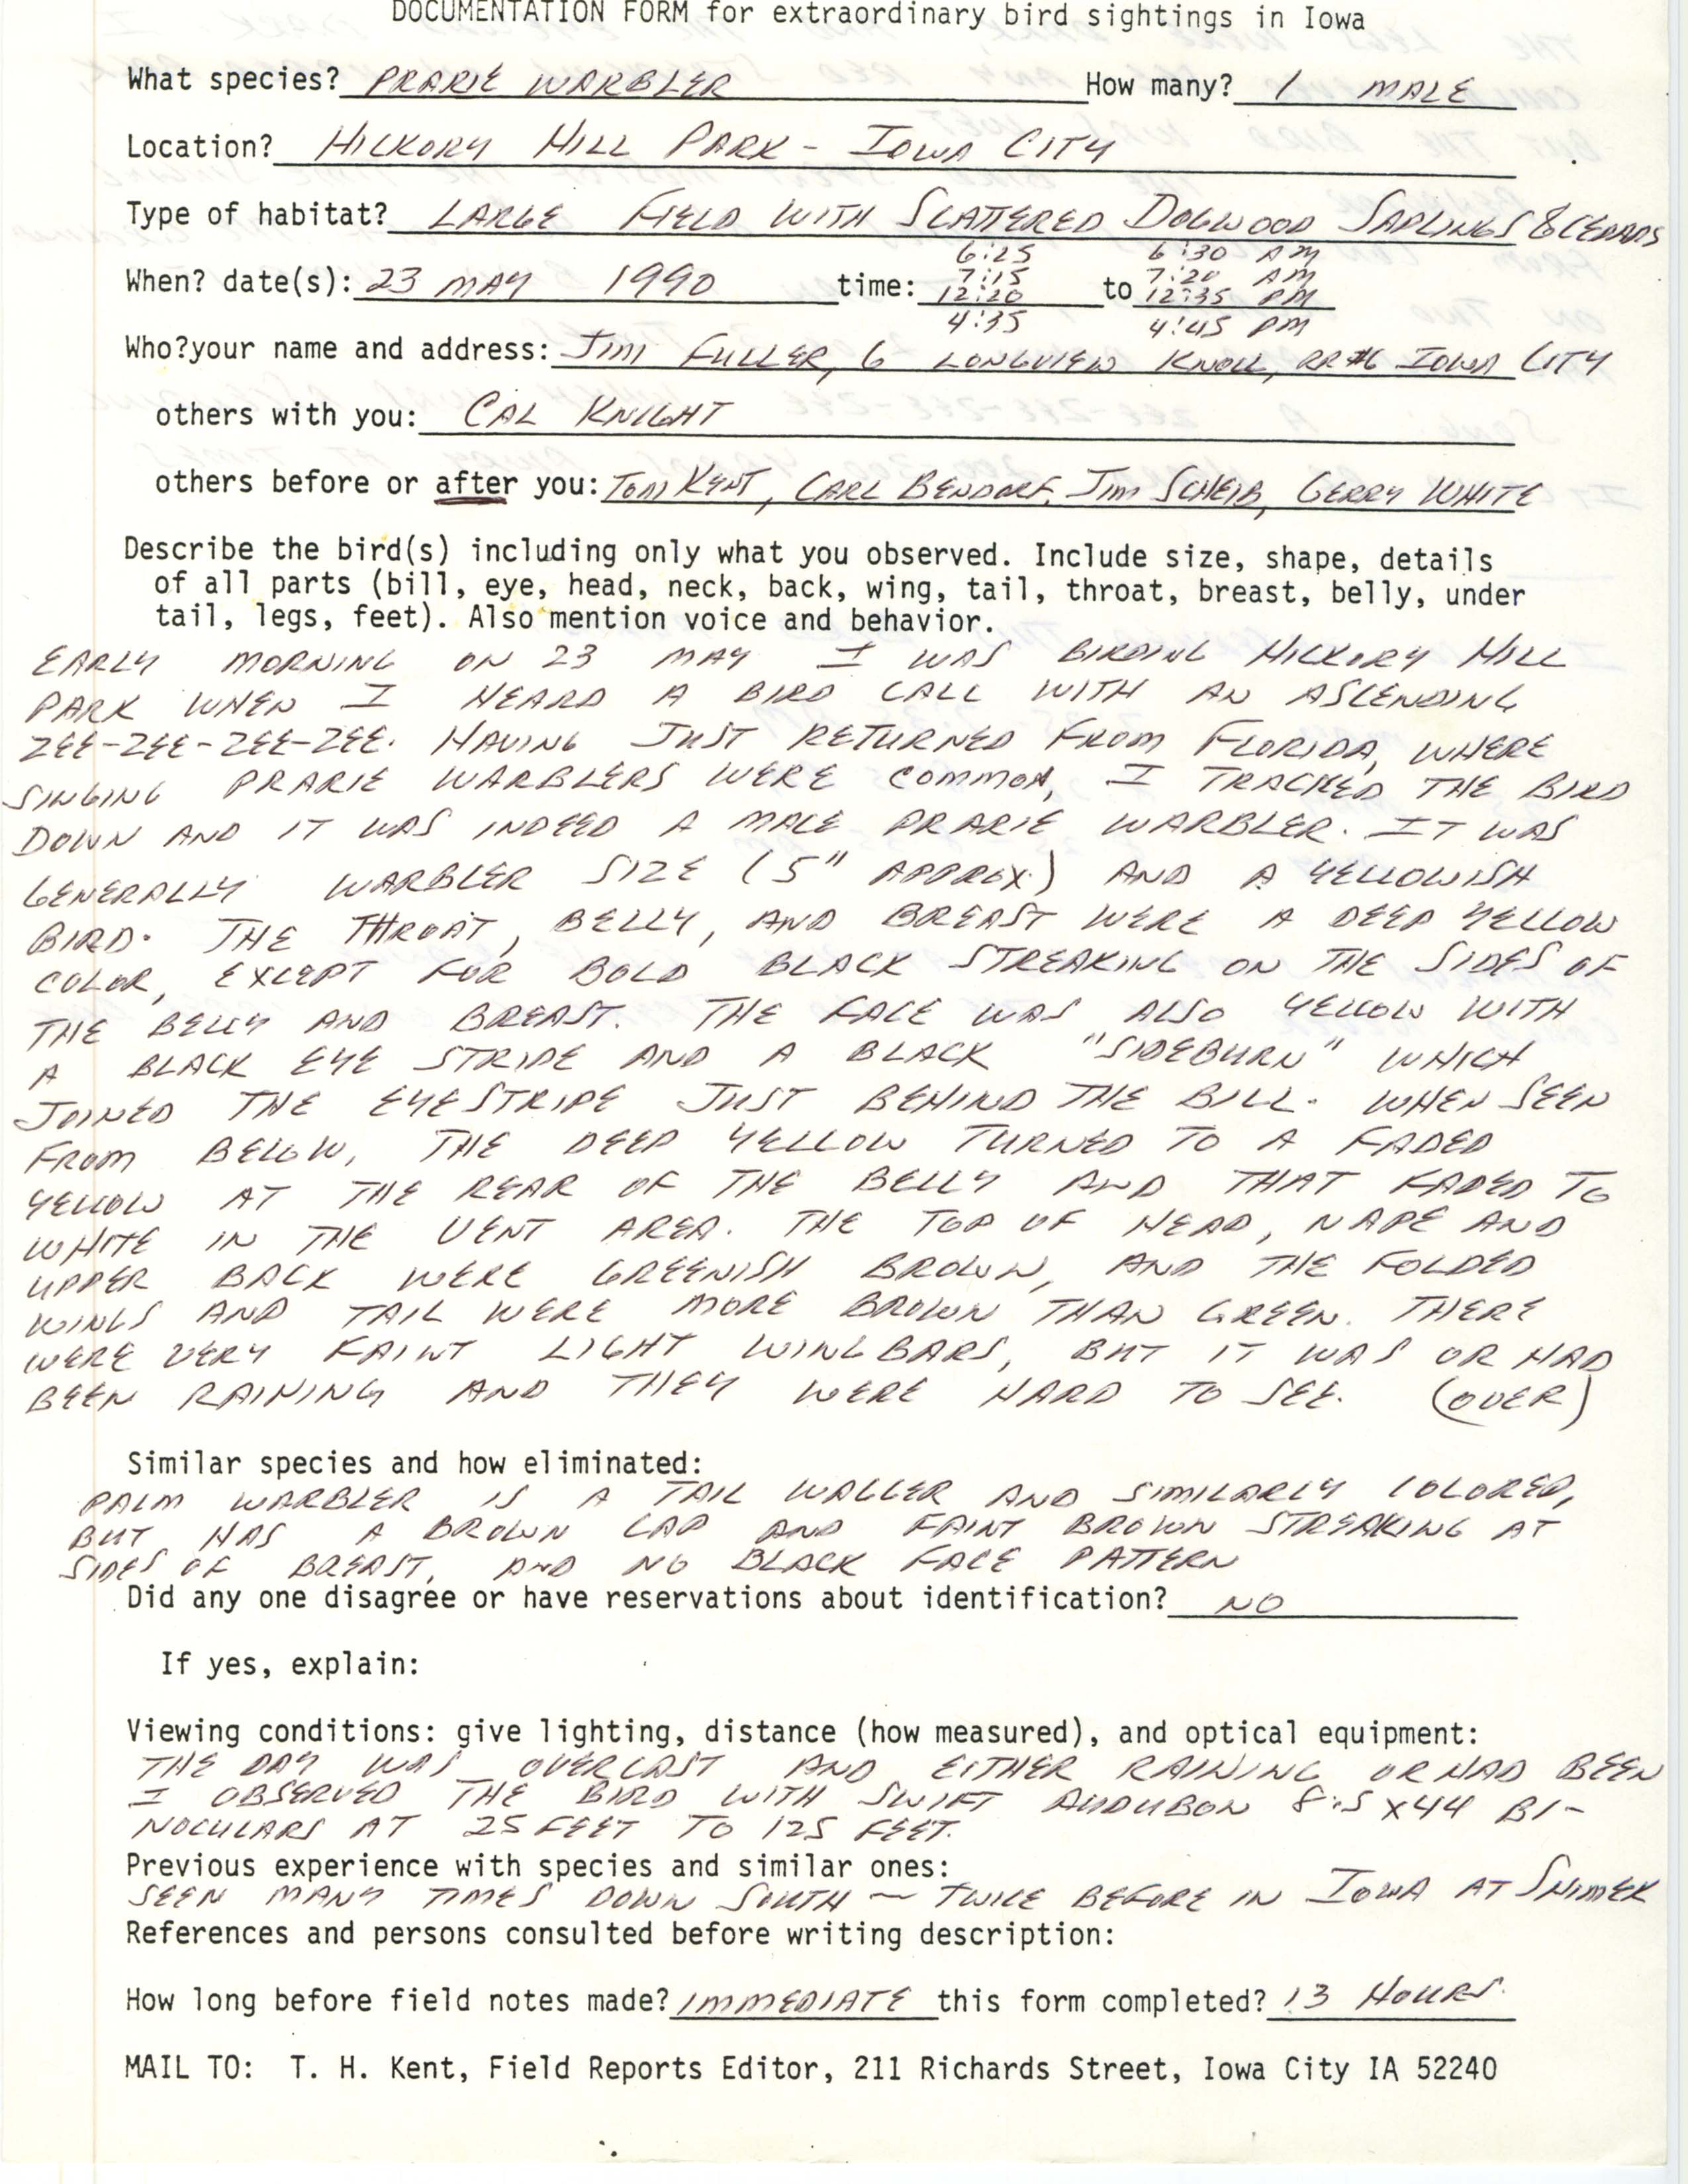 Rare bird documentation form for Prairie Warbler at Hickory Hill Park in Iowa City, 1990